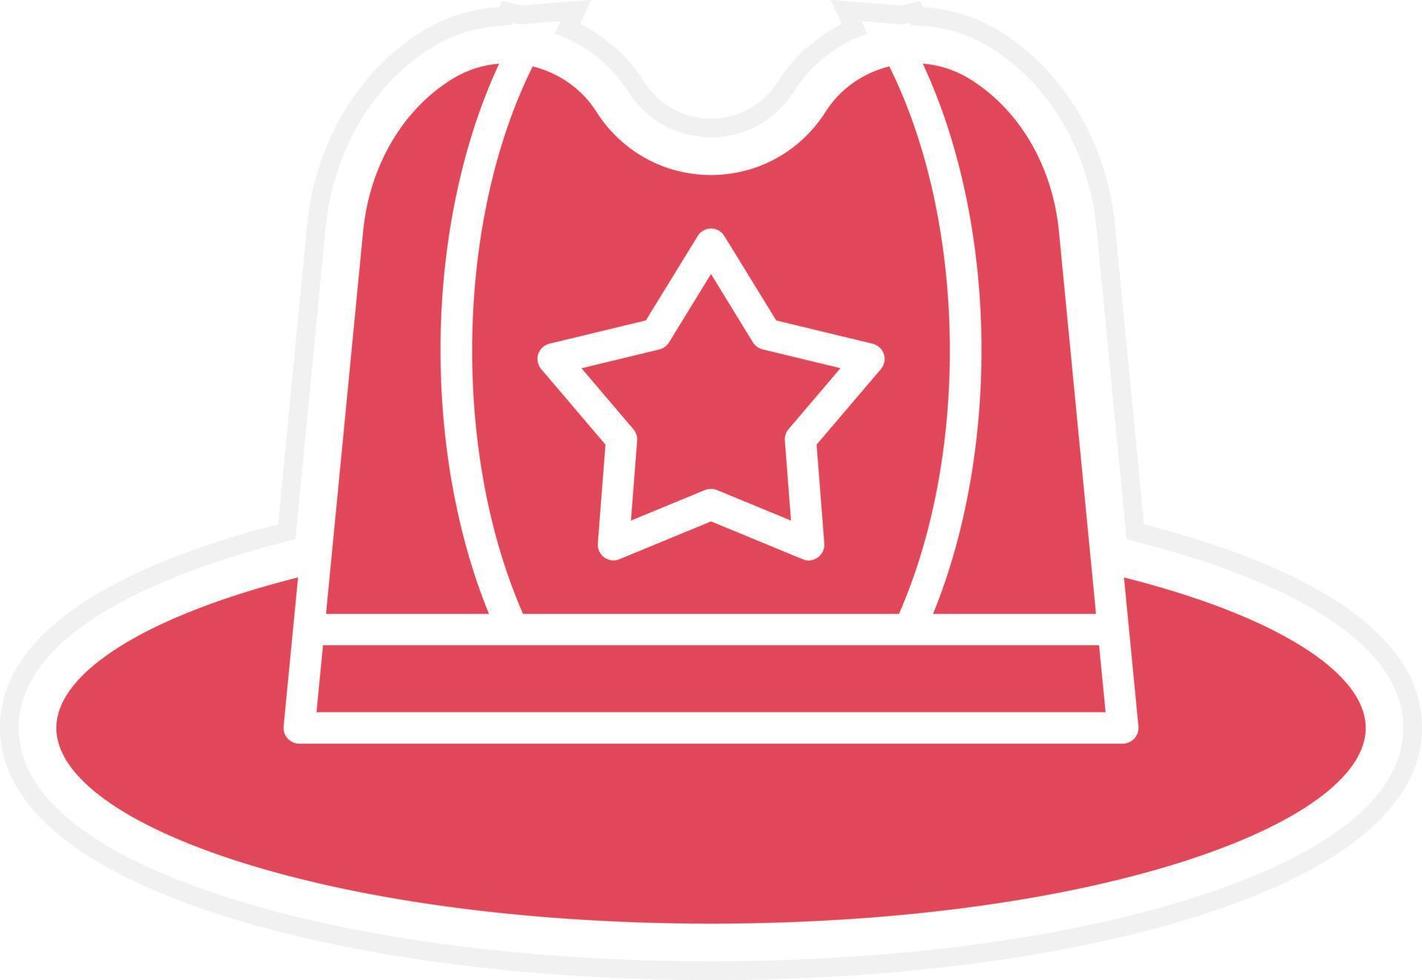 Hat Icon Style vector